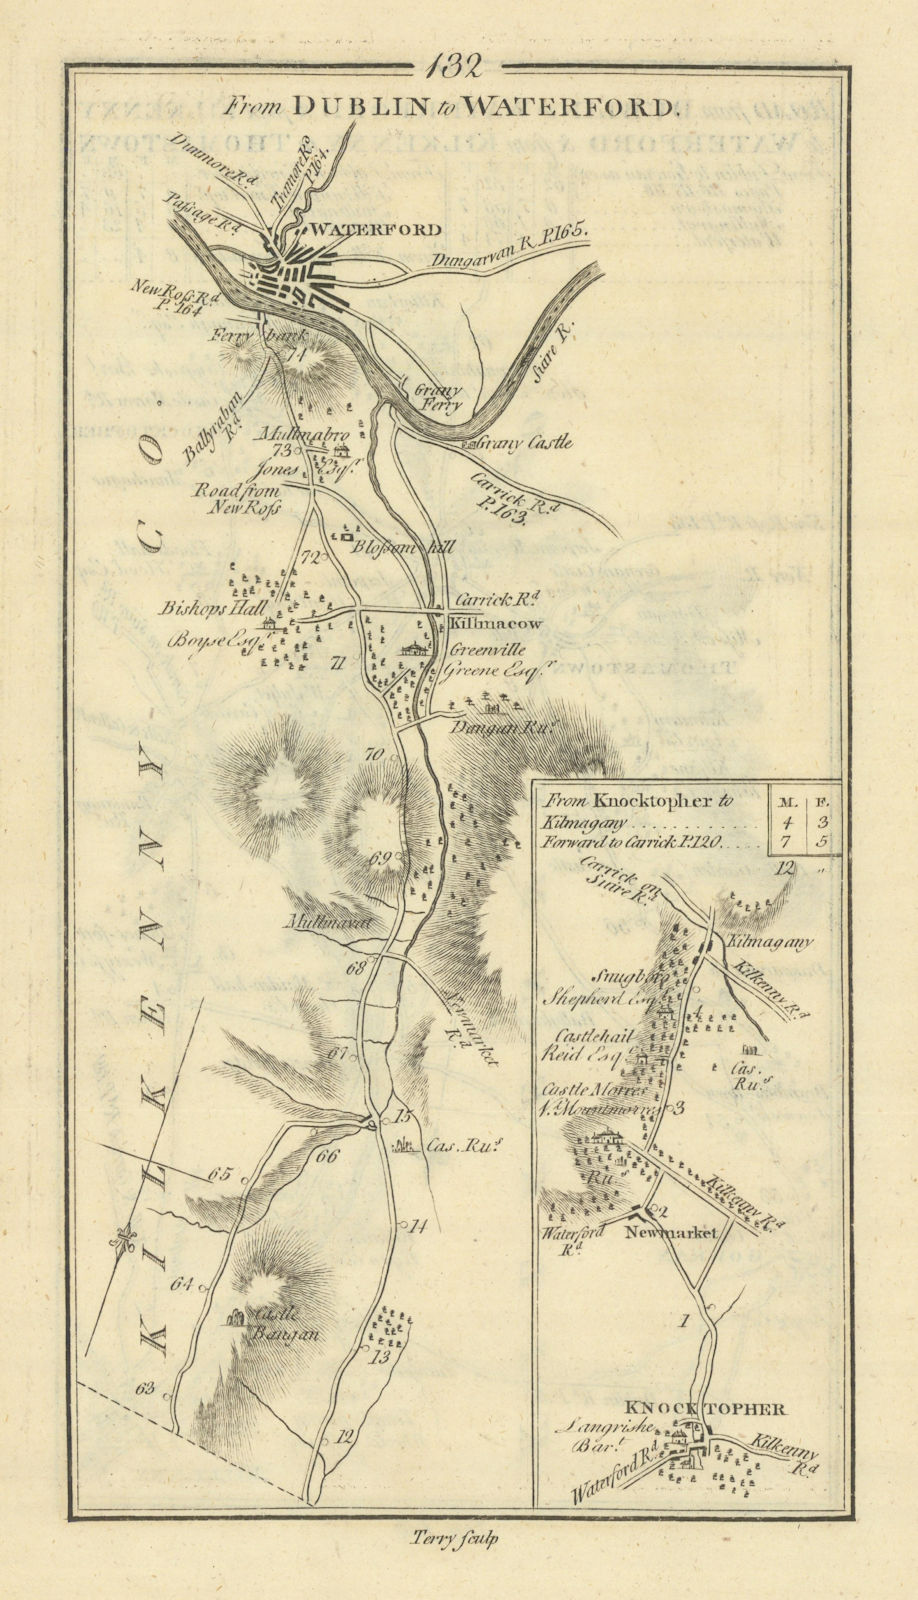 Associate Product #132 Dublin to Waterford. Kilmacow Newmarket Knocktopher TAYLOR/SKINNER 1778 map